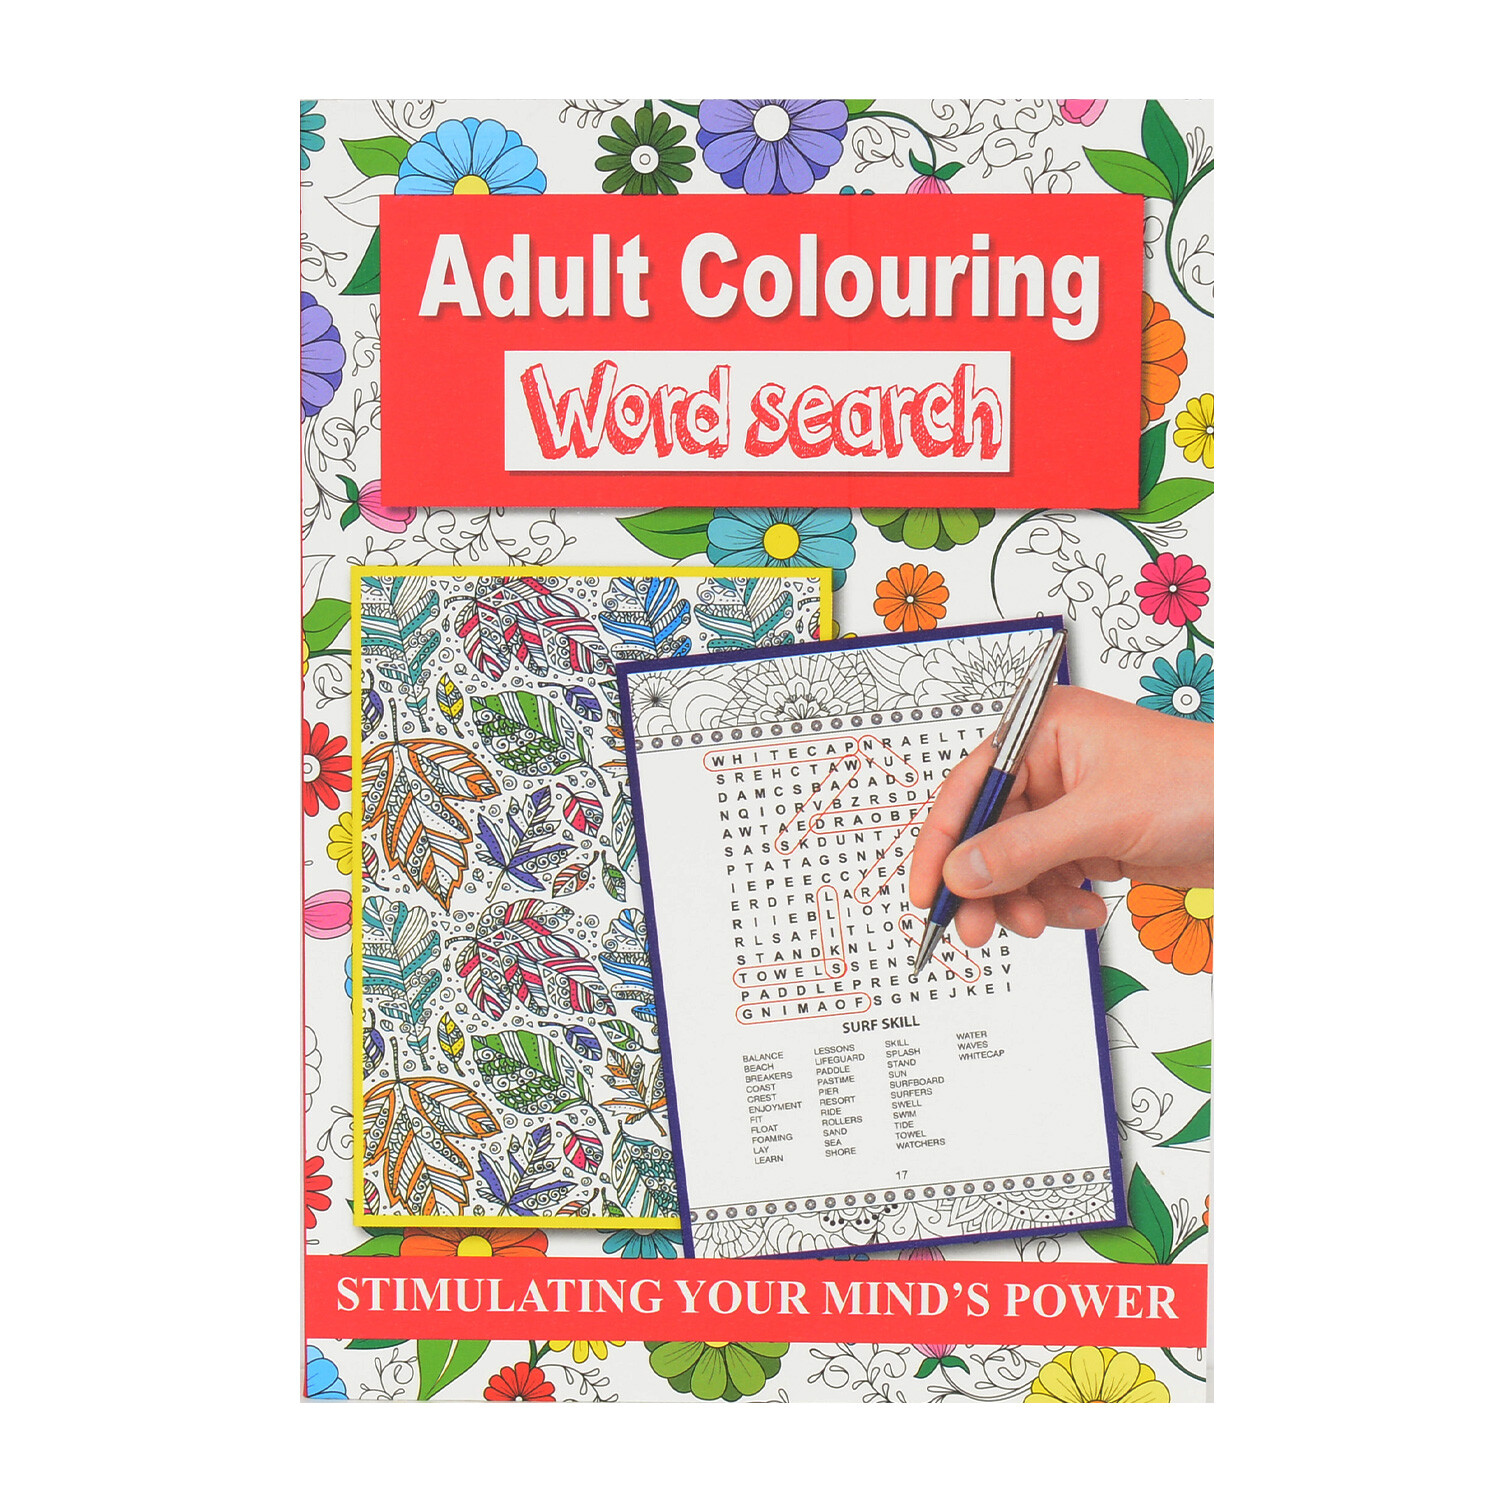 Adult Colouring and Word Search Image 2